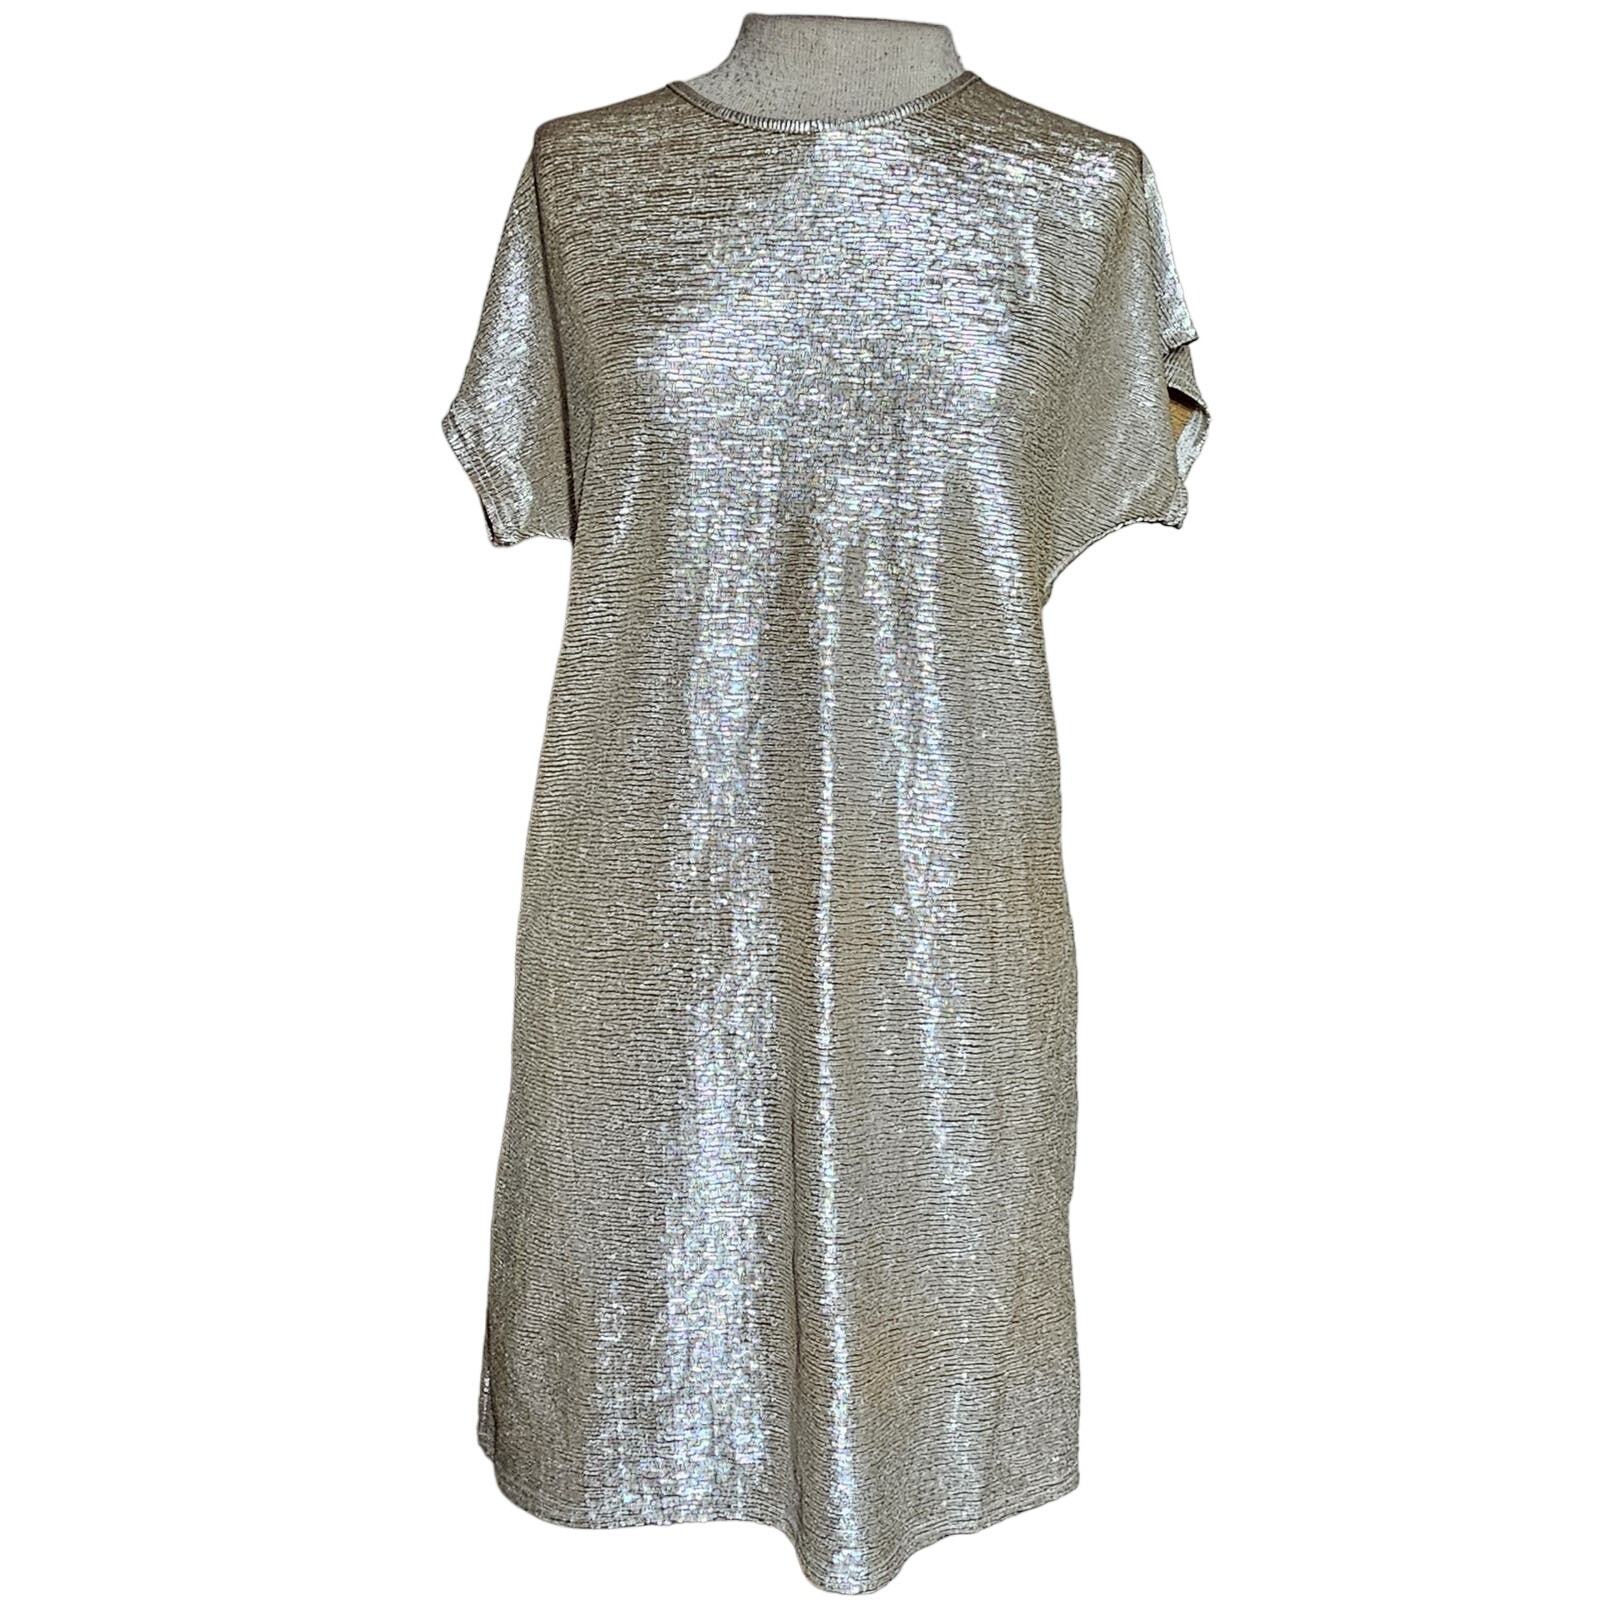 Primary image for Vintage Gold Metallic Shift Dress Size Small 